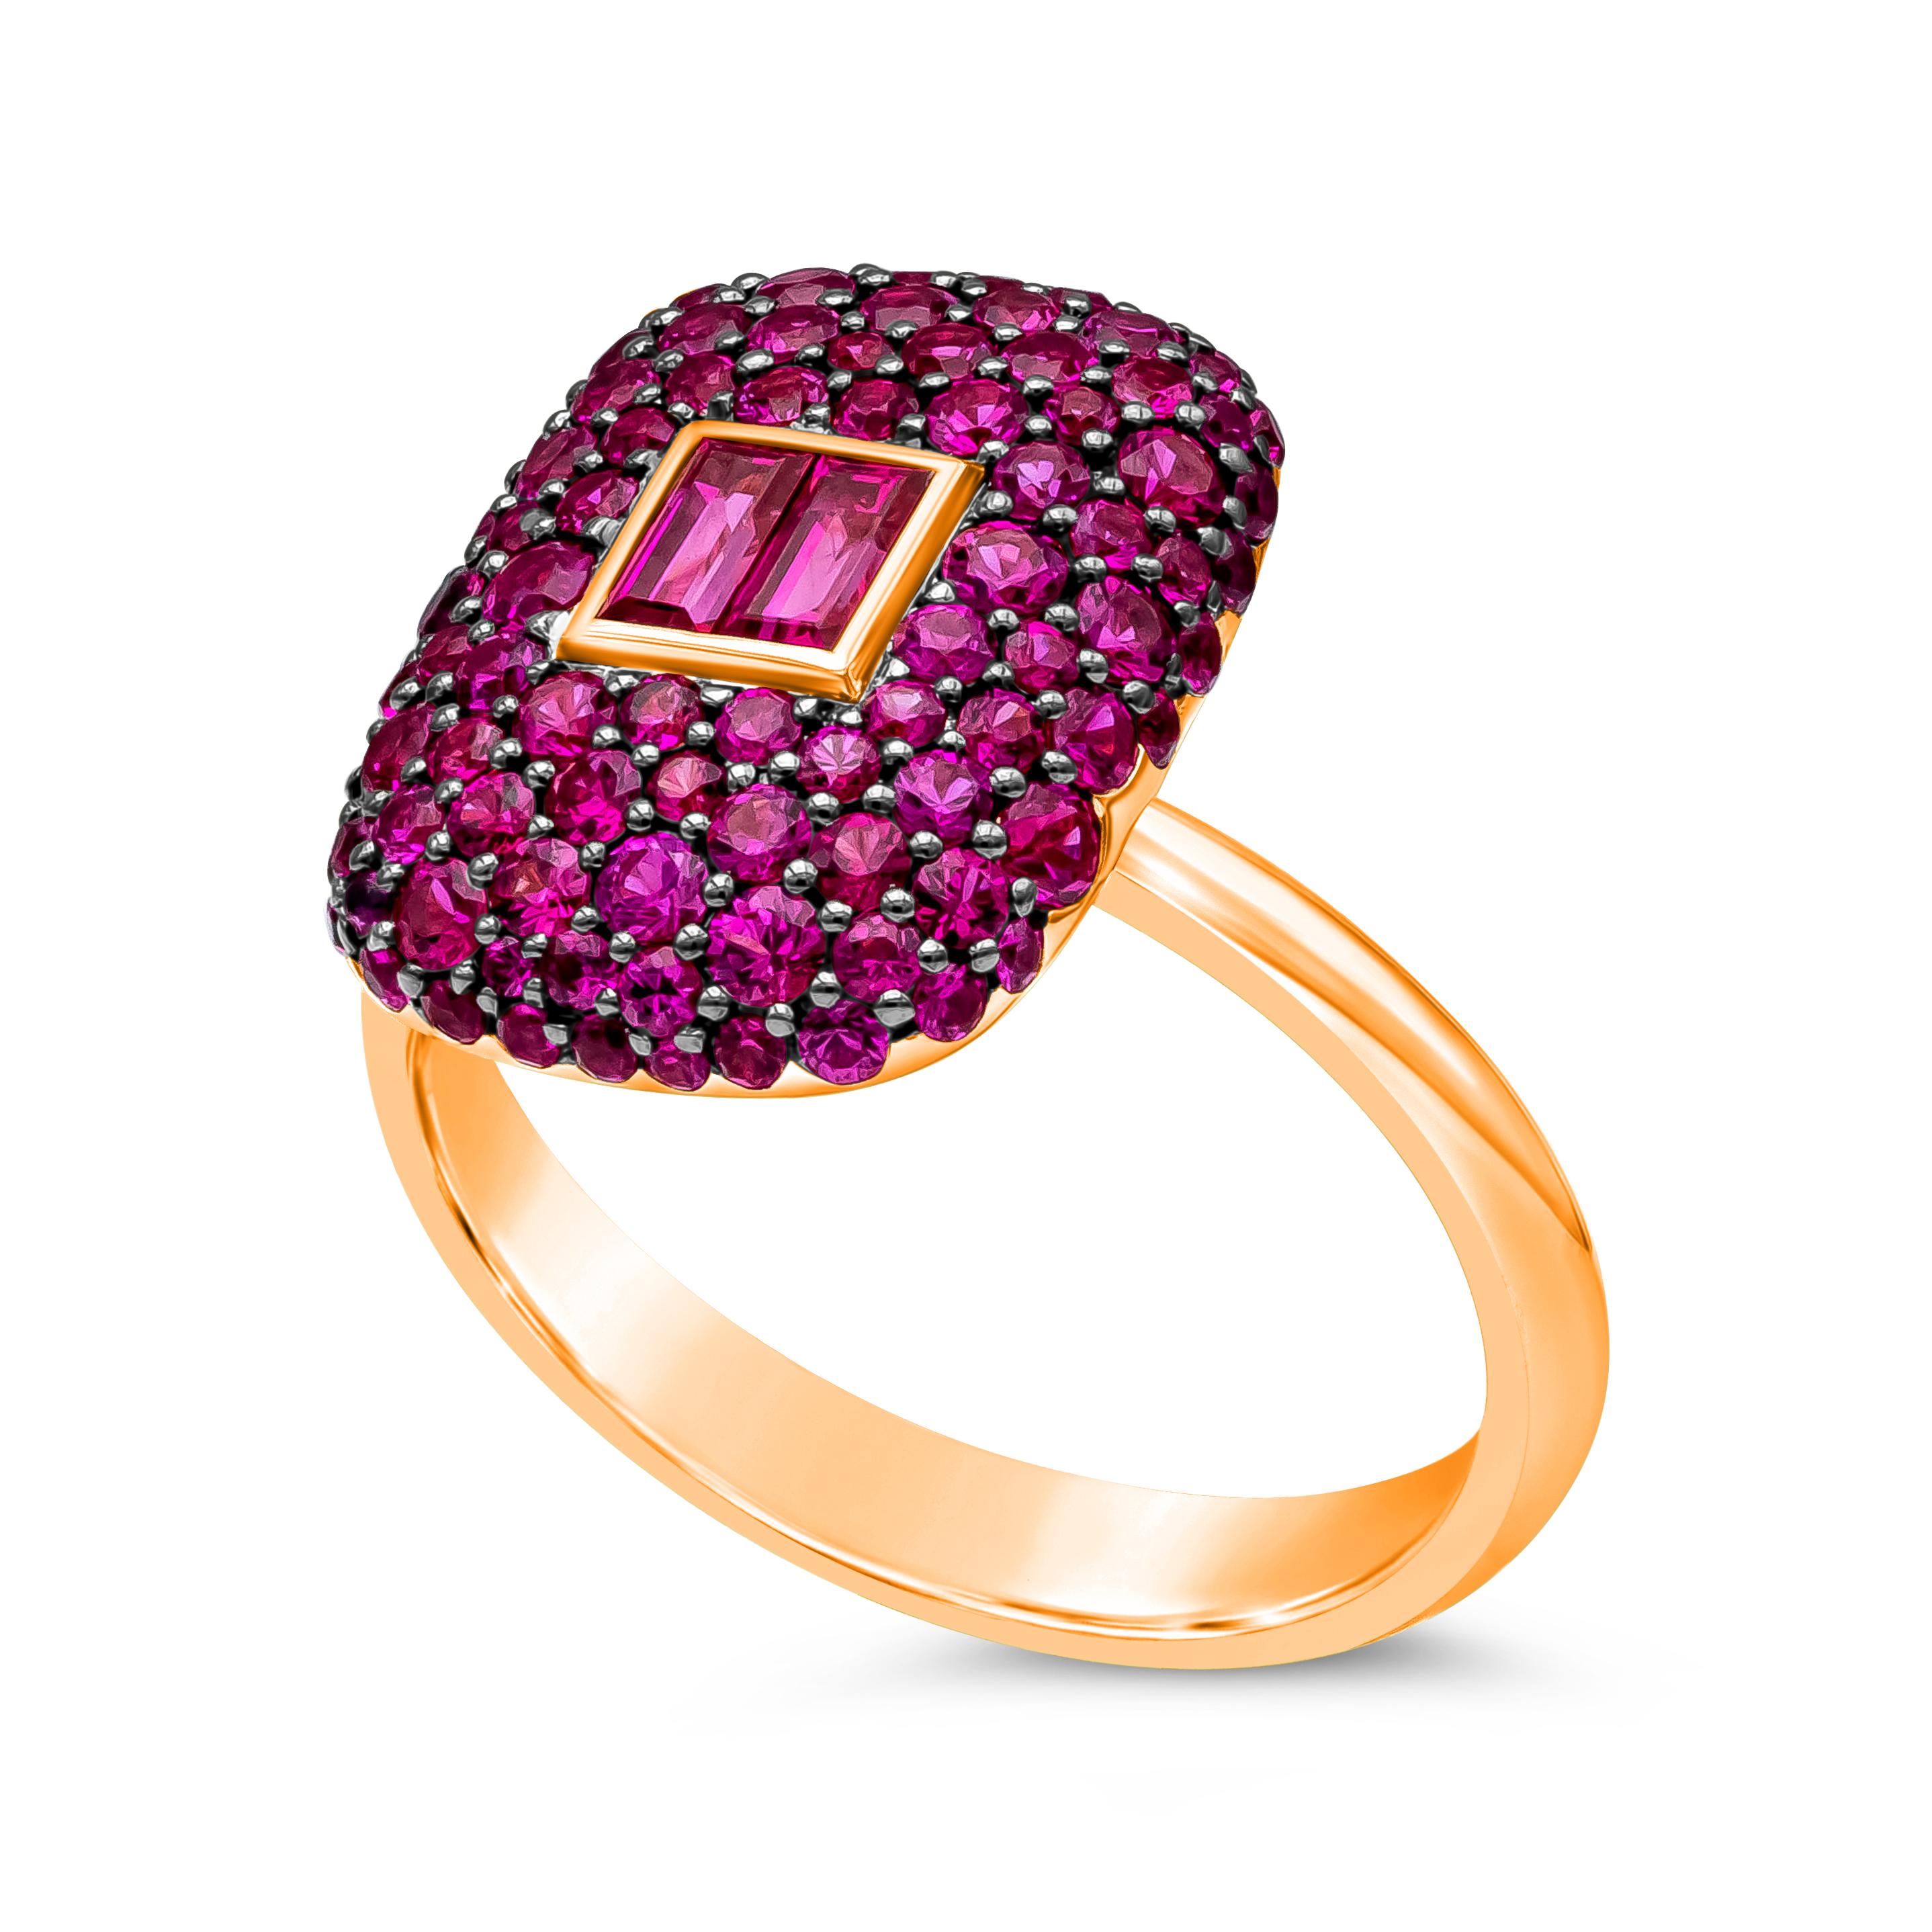 Contemporary Roman Malakov 1.85 Carat Total Mixed Cut Red Ruby Fashion Ring For Sale